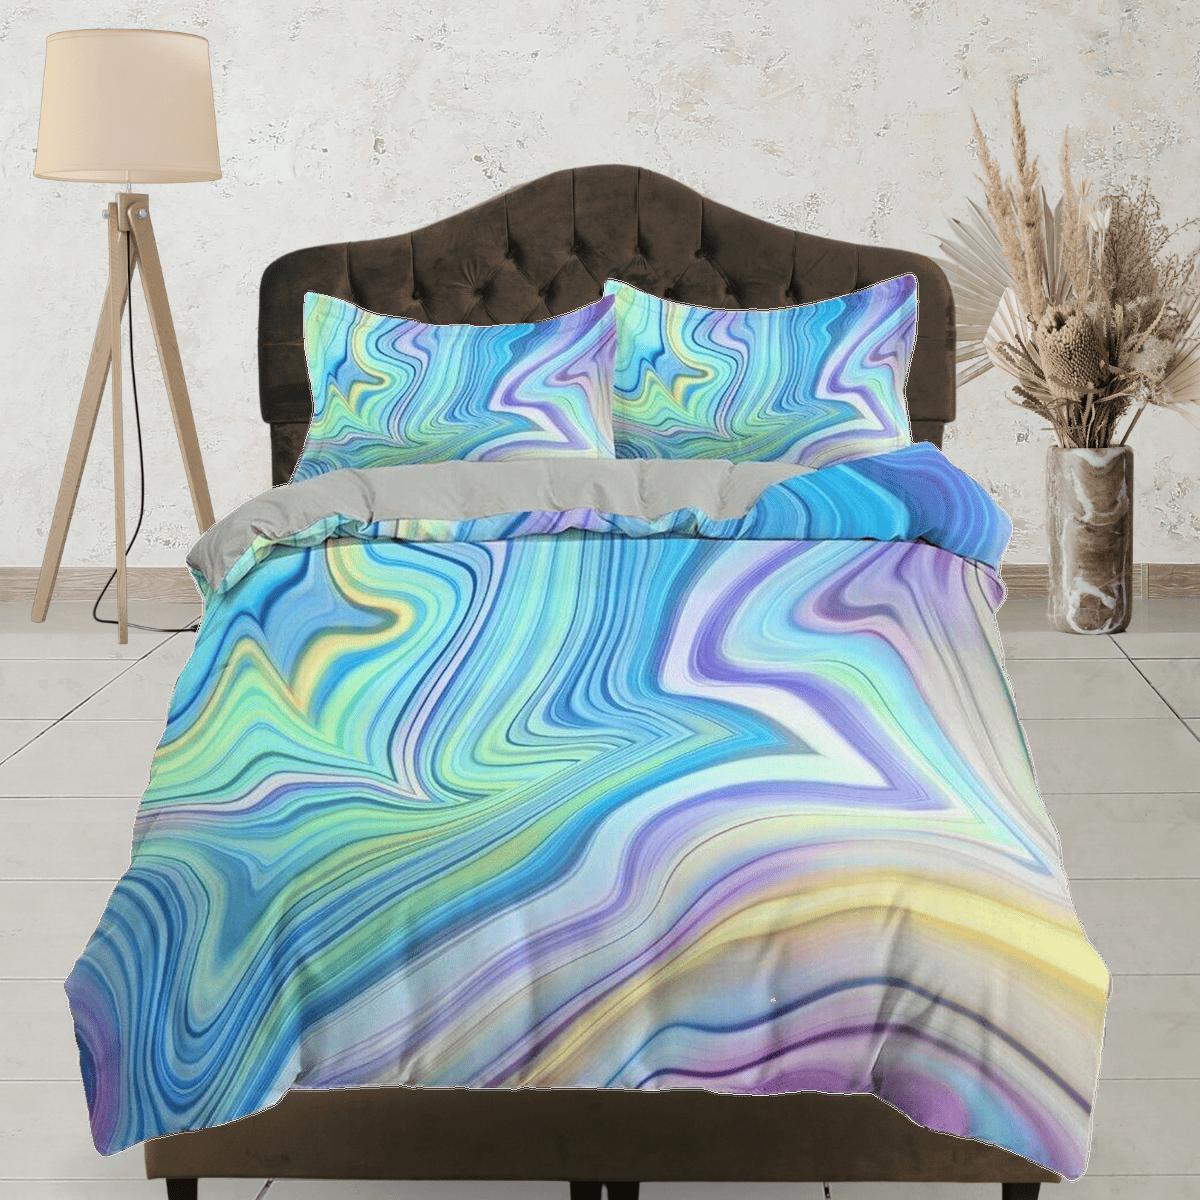 daintyduvet Cyan blue purple yellow contemporary bedroom set aesthetic duvet cover, marble abstract art room decor boho chic bedding set full king queen